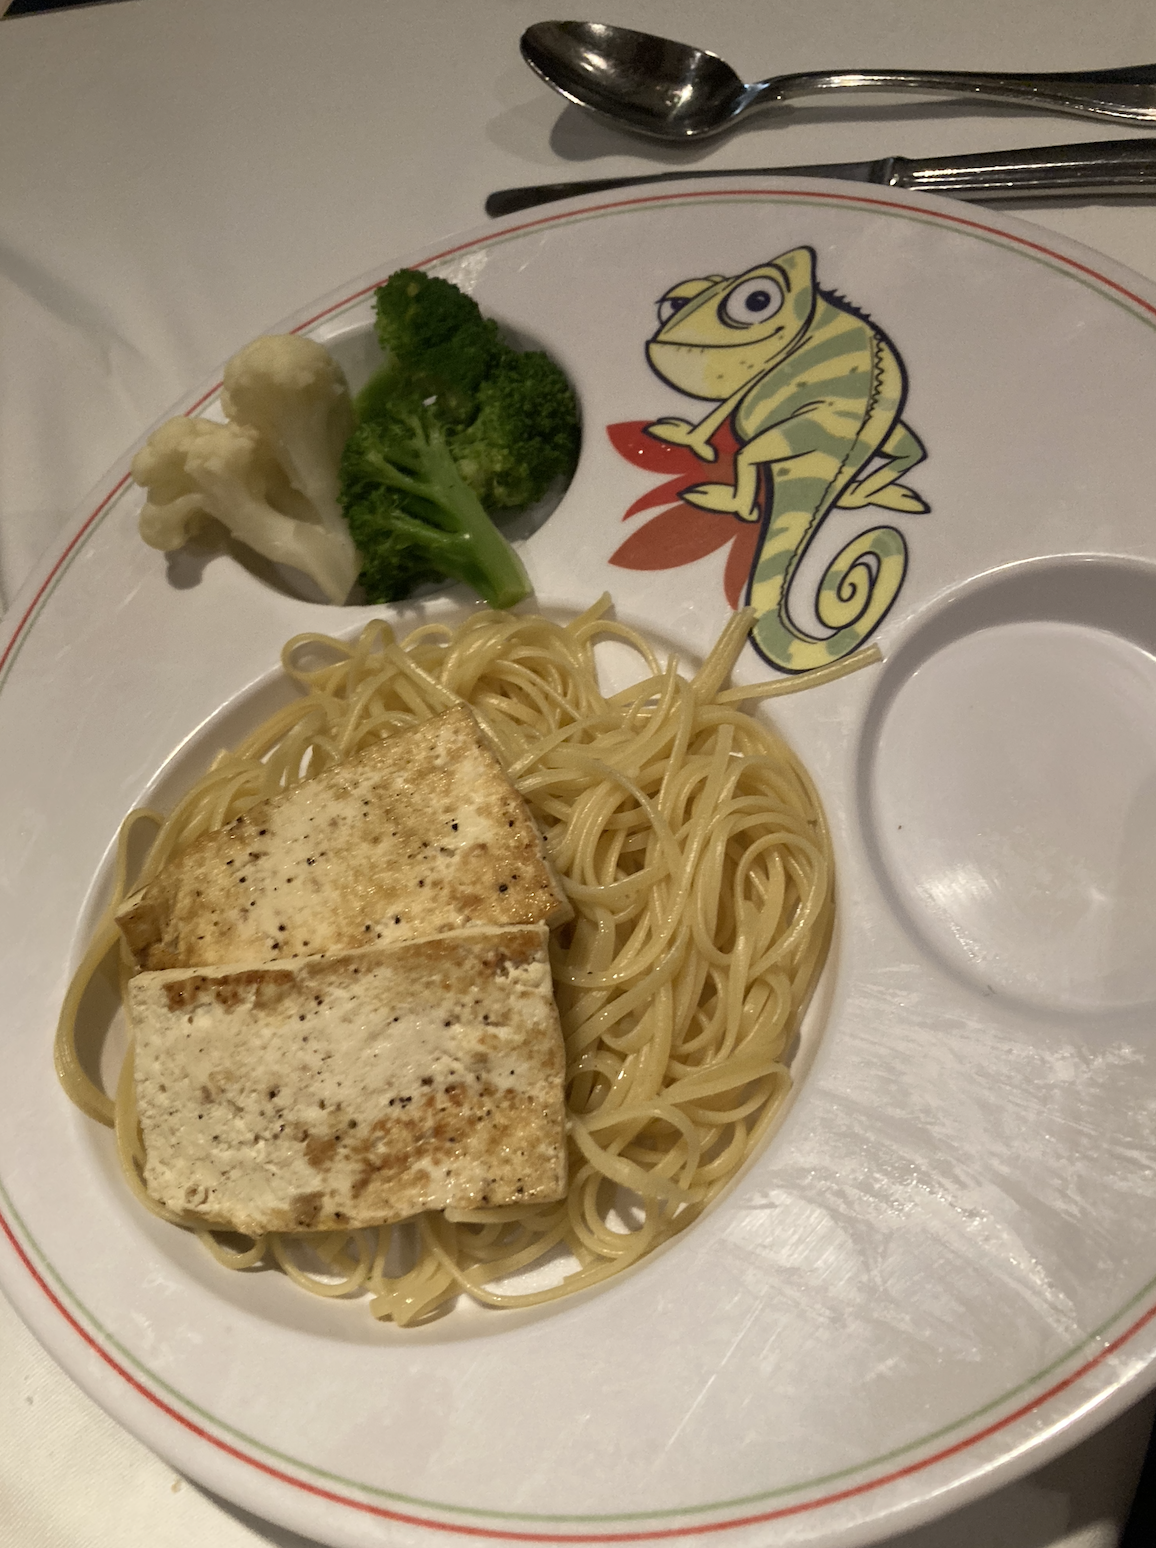 Plate with spaghetti, grilled tofu, broccoli, and cauliflower. The plate has a drawing of a chameleon on it